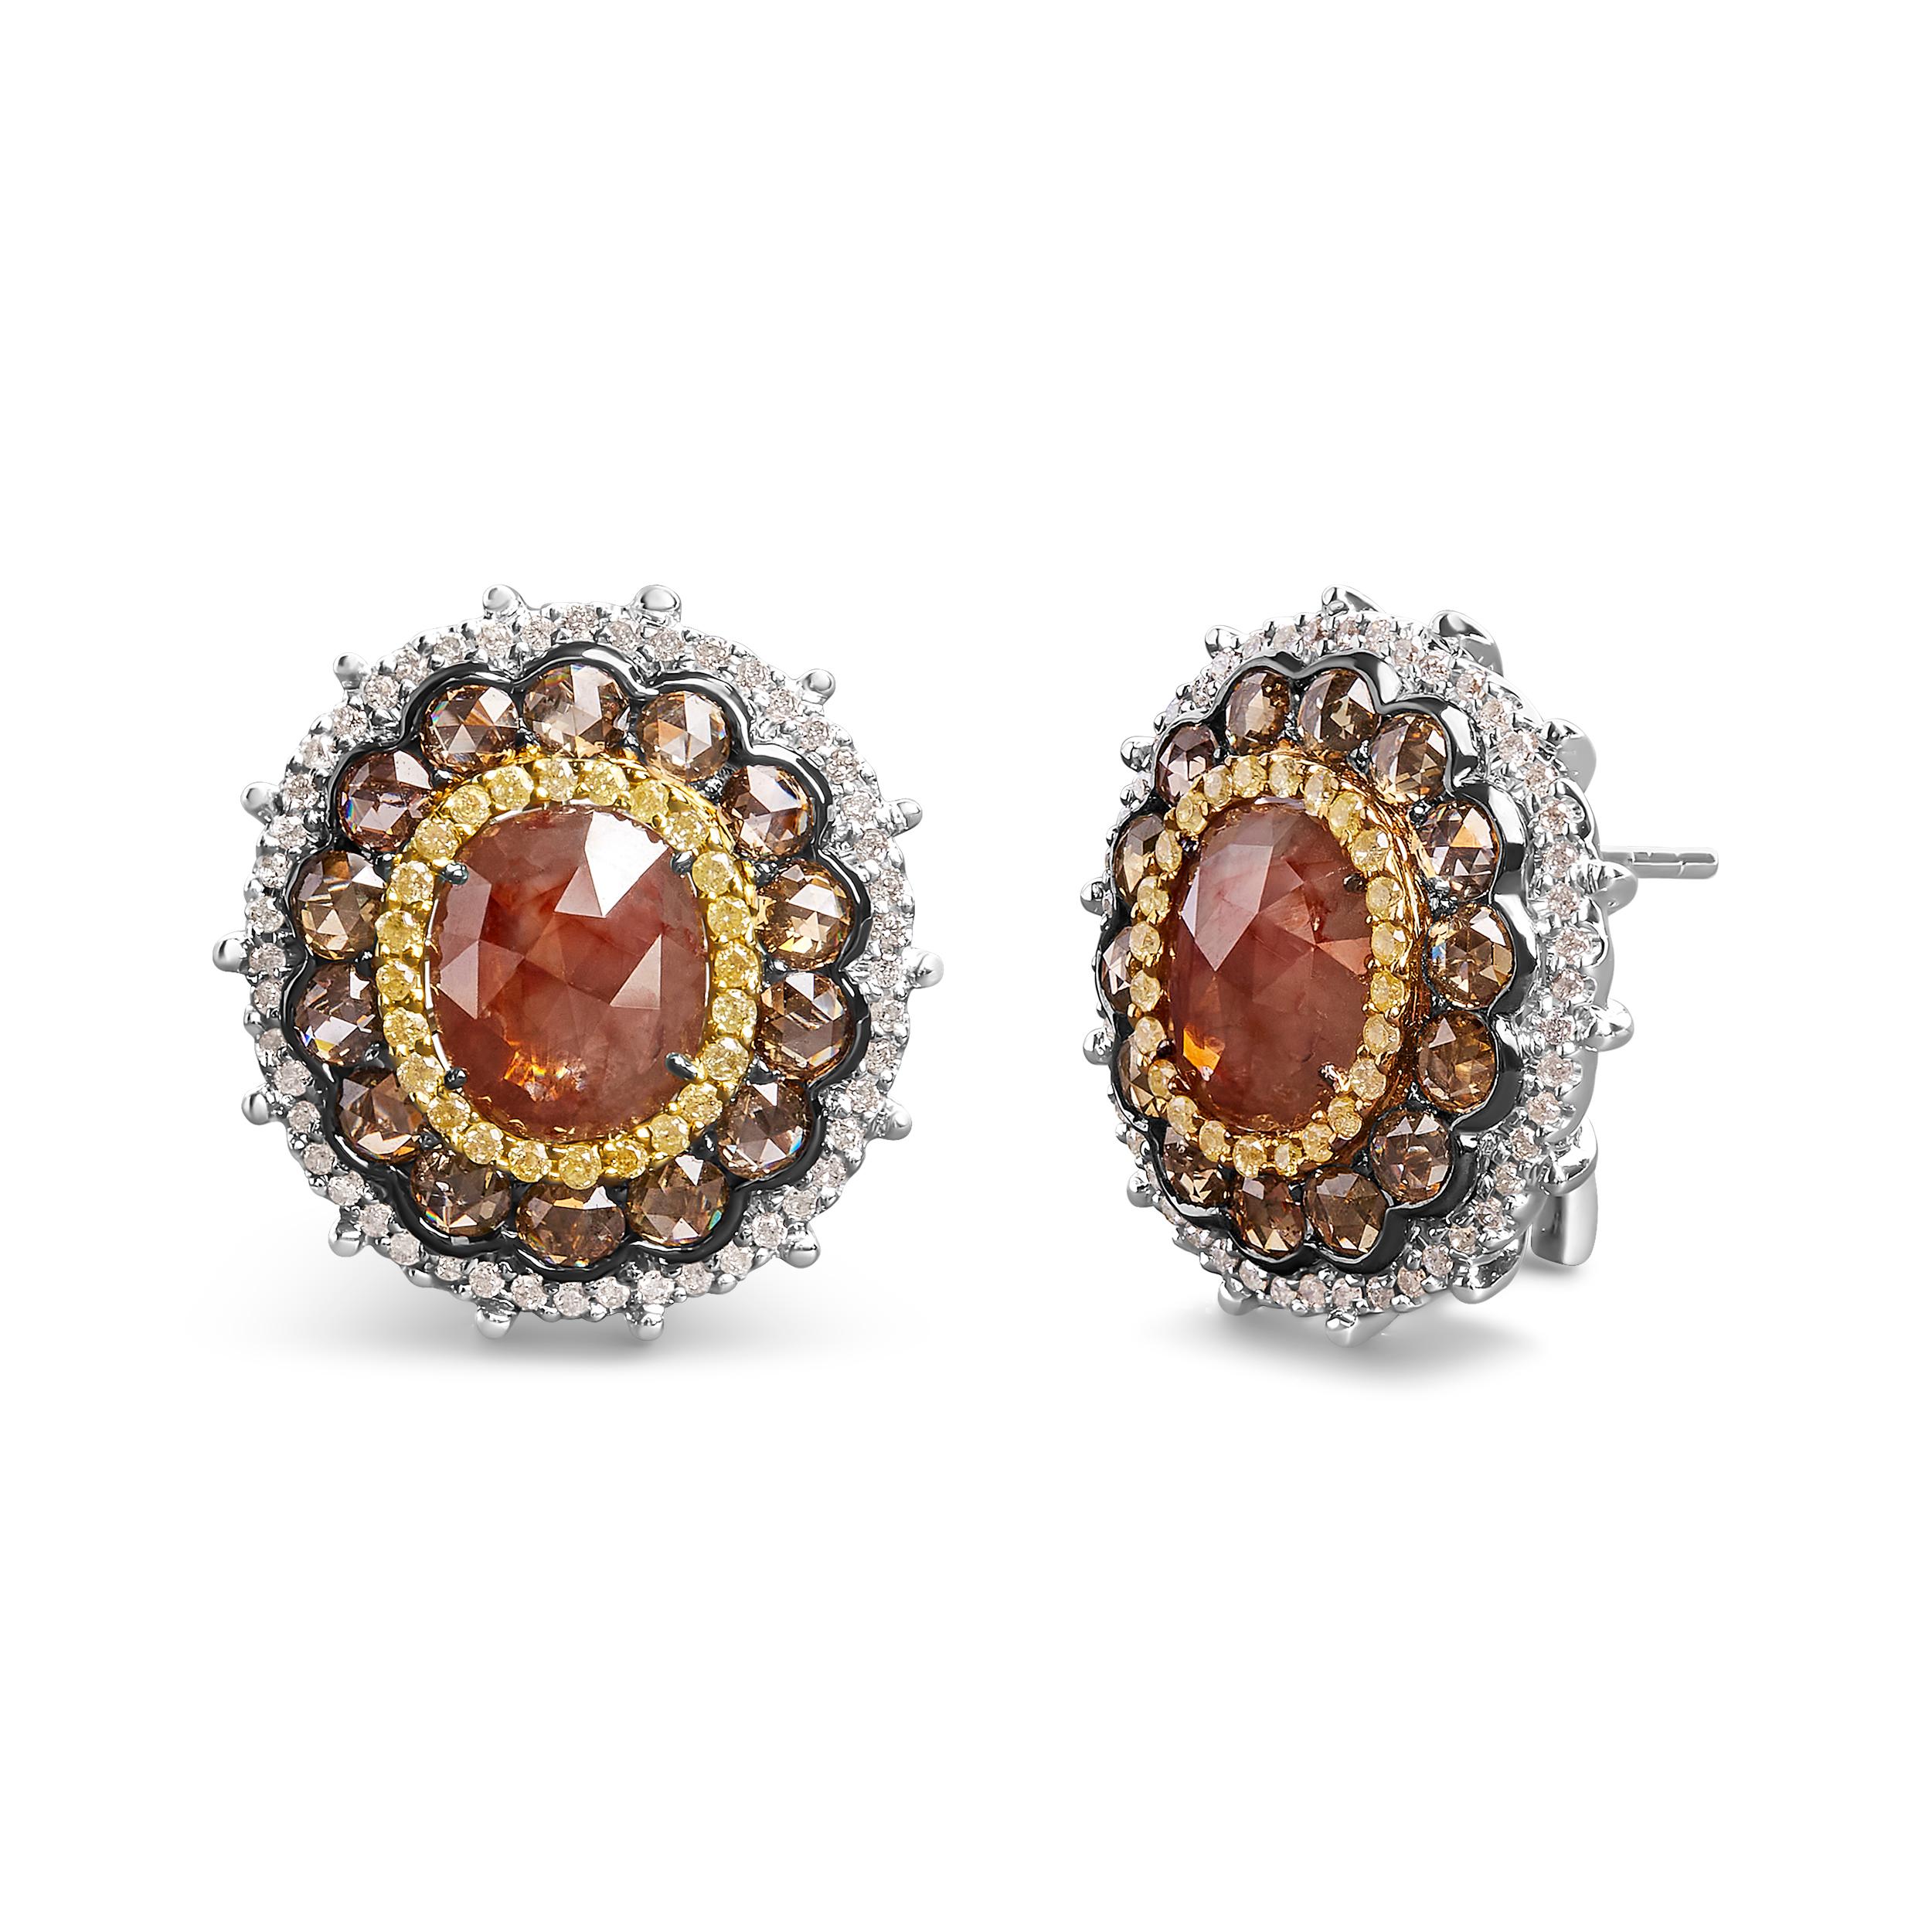 Introducing a captivating masterpiece that exudes elegance and sophistication. Crafted with meticulous attention to detail, these 14K White Gold Stud Earrings boast a remarkable 6 1/2 carat total weight of exquisite Rose and Round Cut Fancy Colored